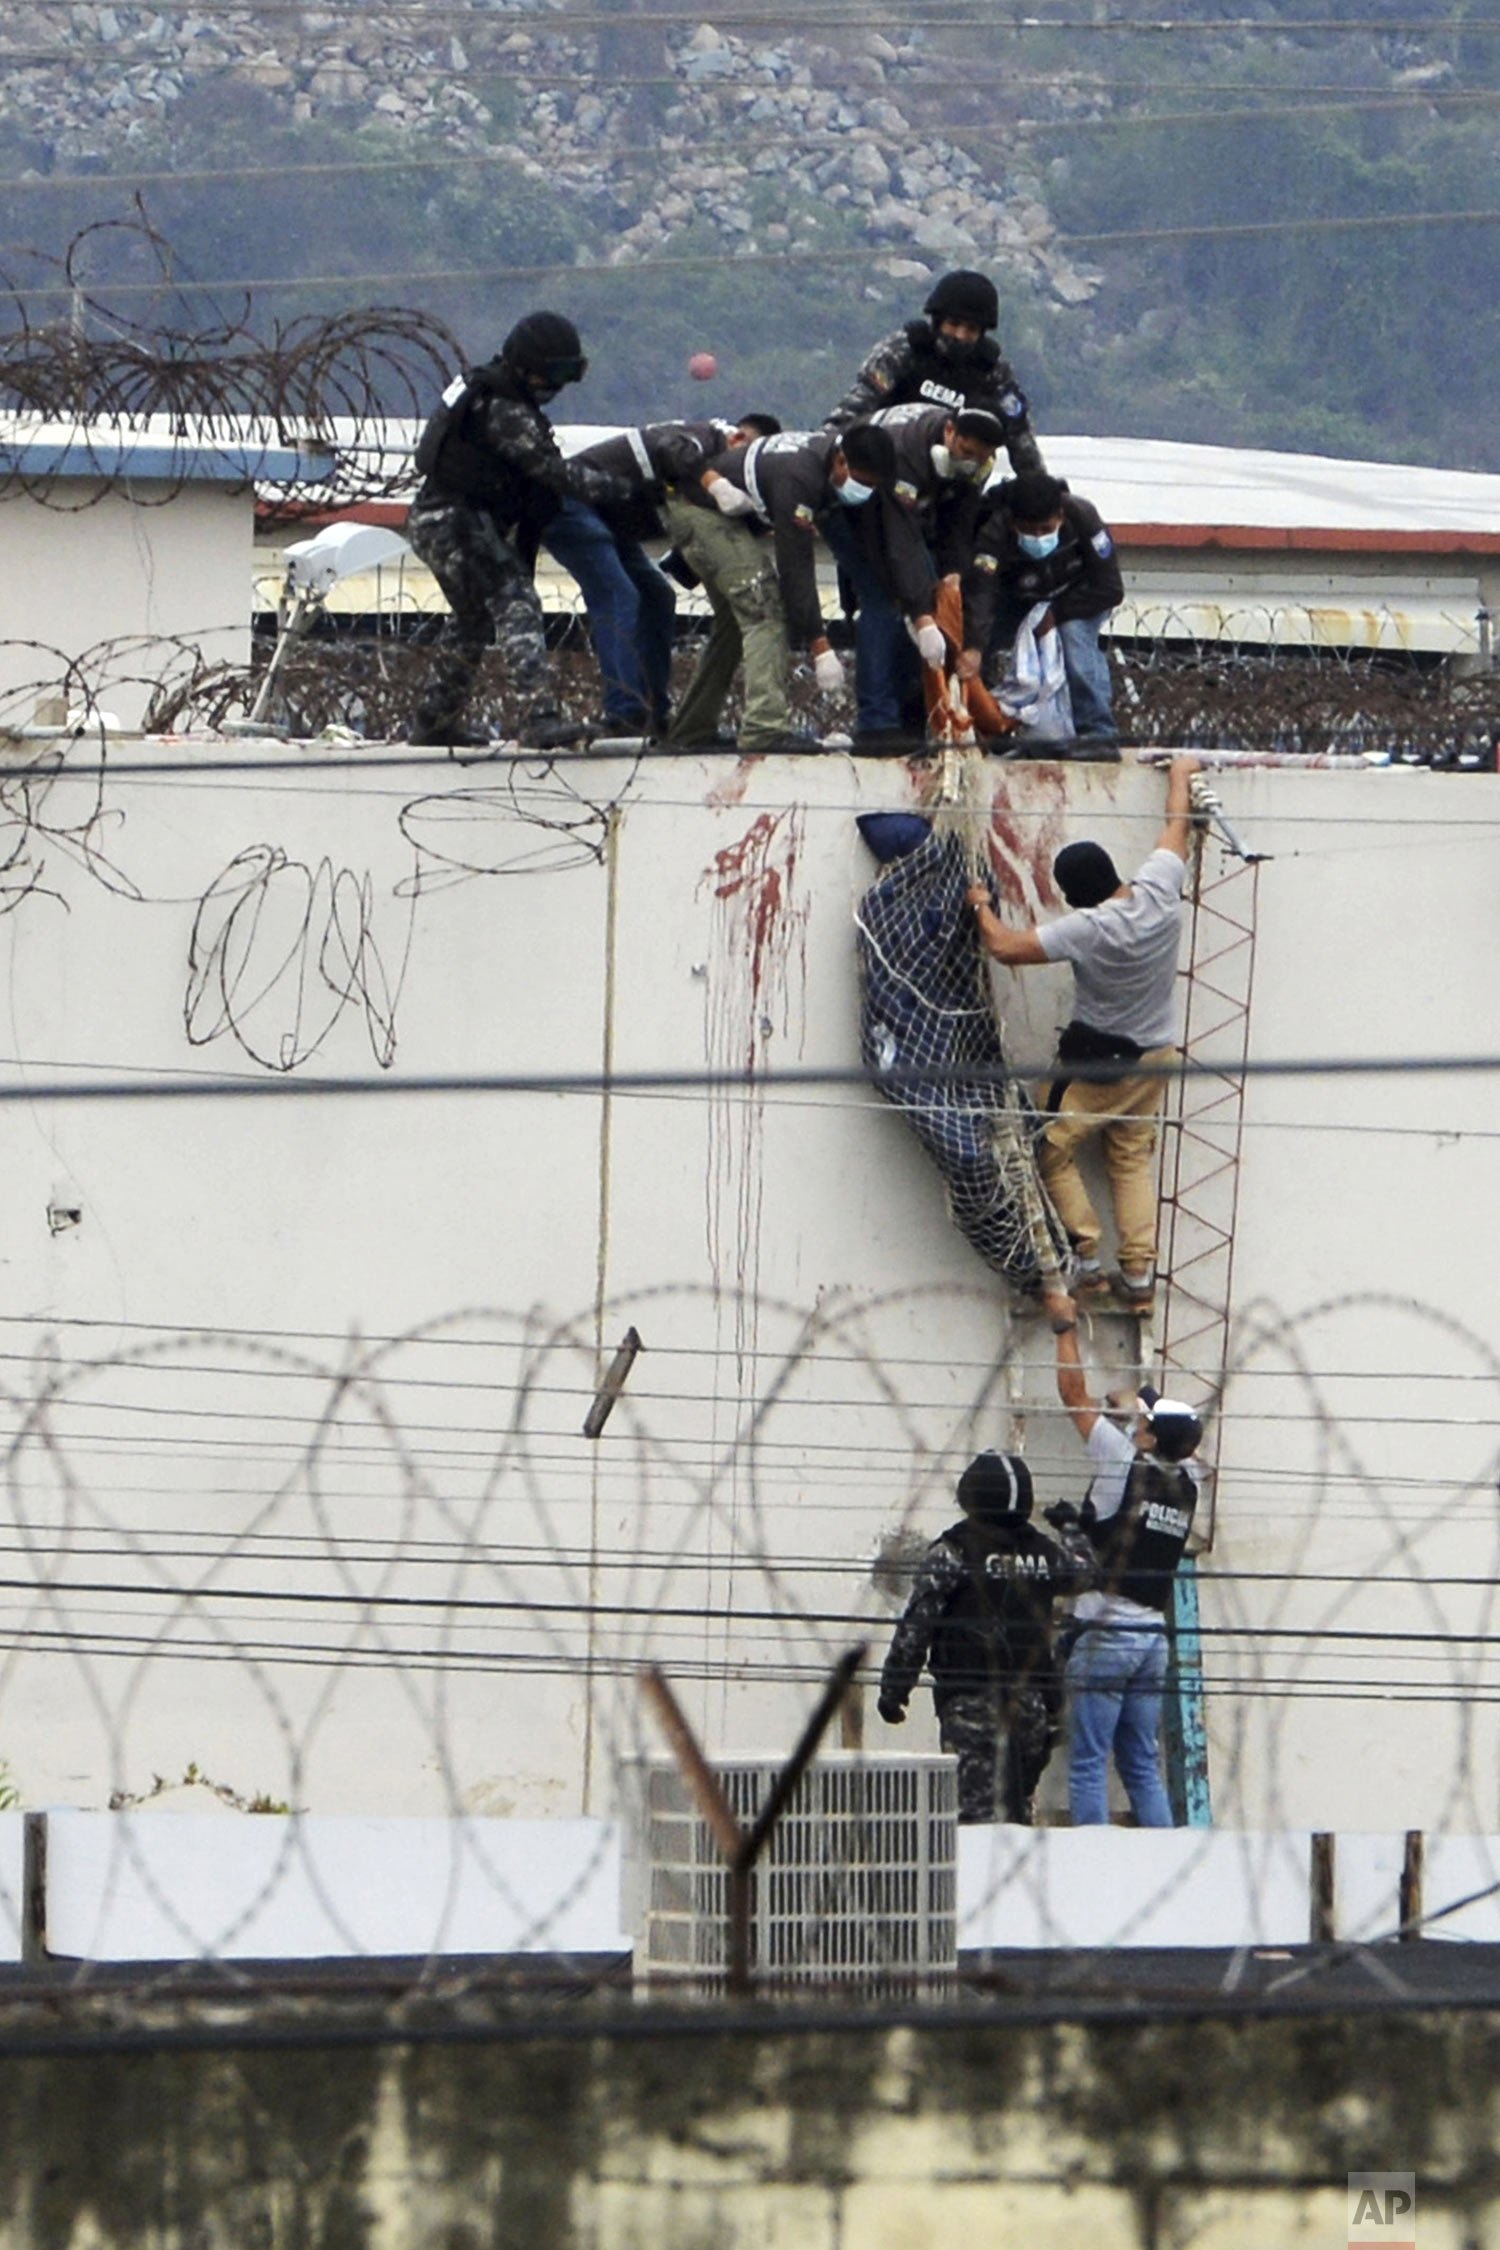  Police lower the body of a prisoner from the roof of the Litoral penitentiary the morning after riots broke out inside the jail in Guayaquil, Ecuador, Nov. 13, 2021. (AP Photo/Jose Sanchez) 